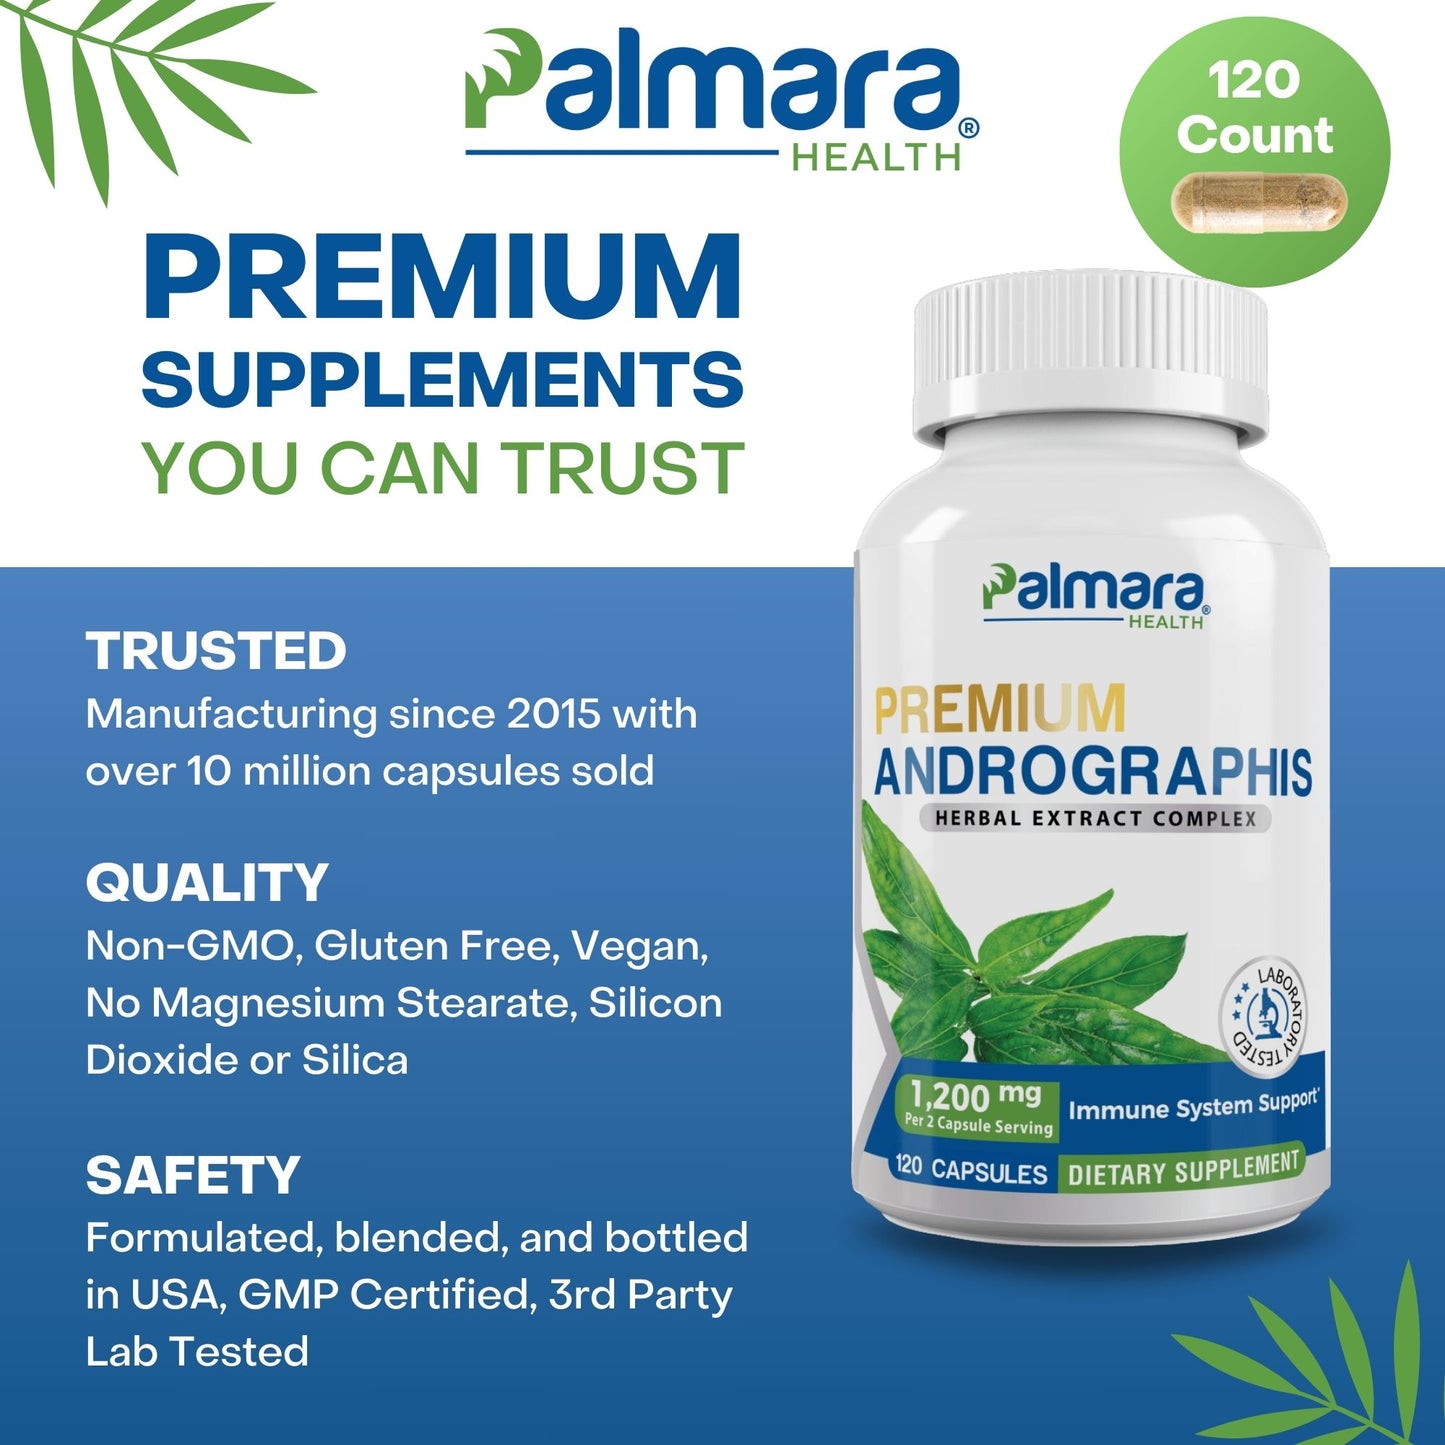 
                  
                    Promotional graphic for Palmara Health Premium Andrographis emphasizing the product's plant-based, trusted attributes with a clear view of the bottle and 120 capsule count.
                  
                